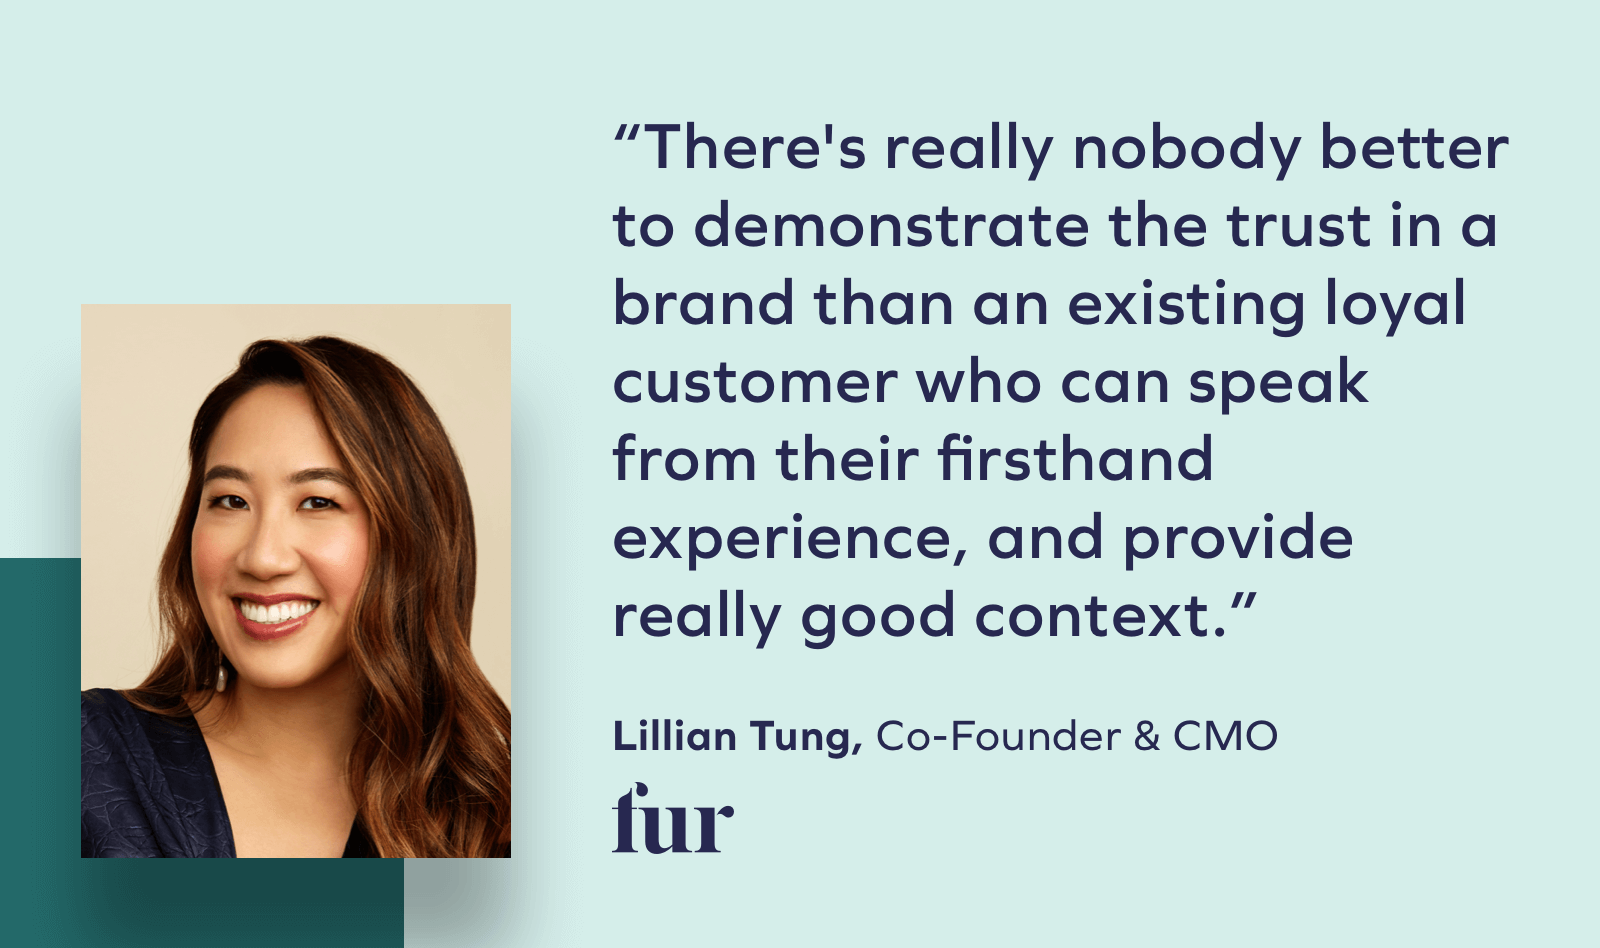 Lillian Tung, Co-Founder and CMO of Fur